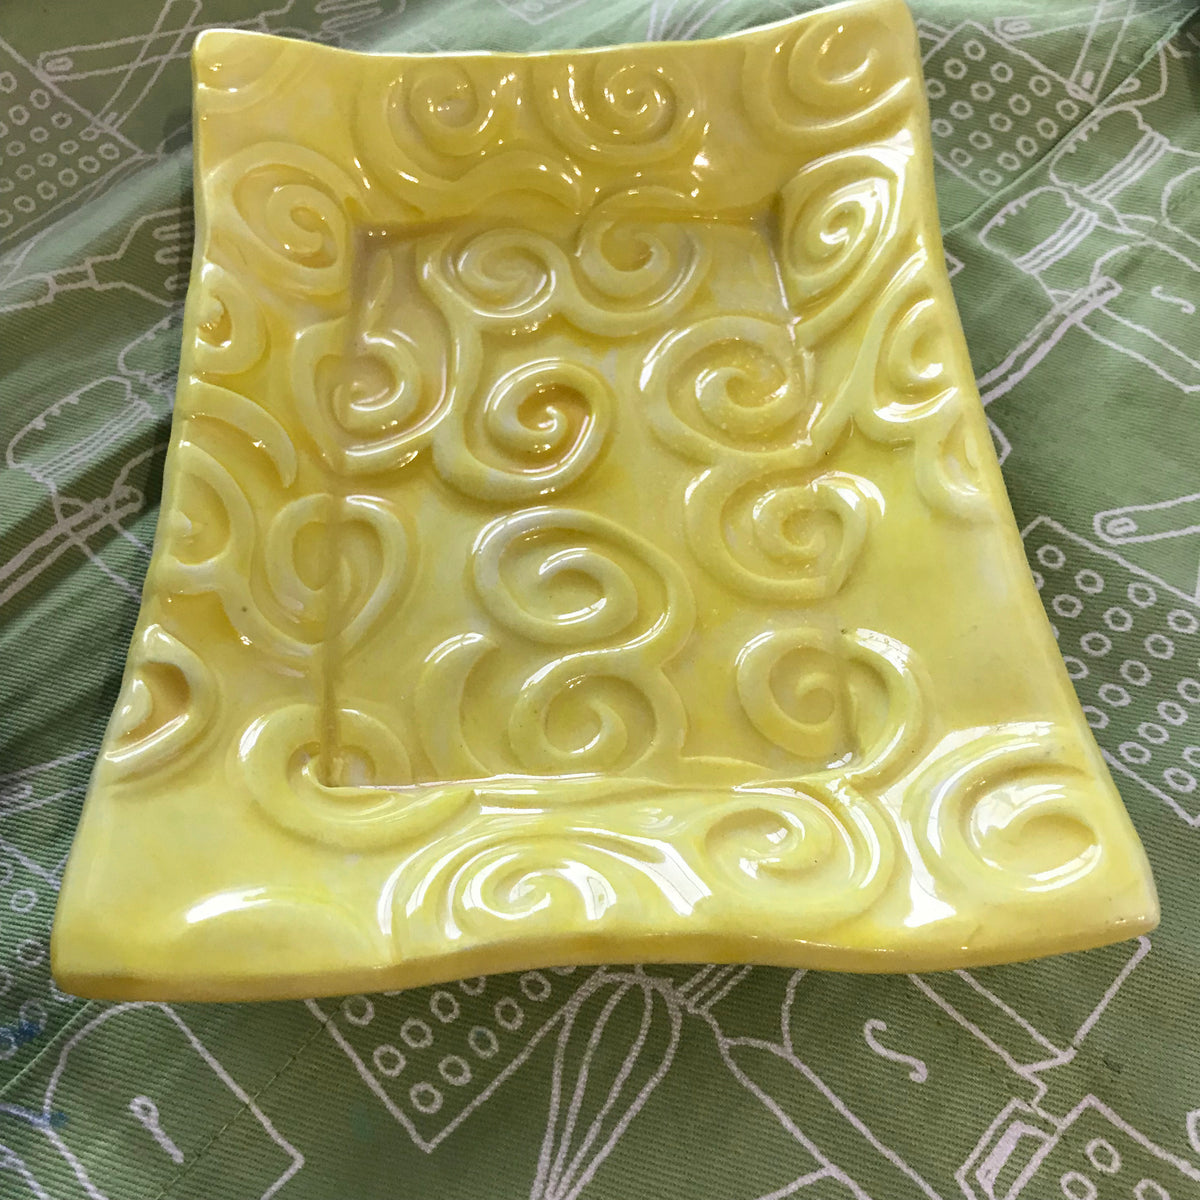 A Handmade Pottery Tray Glazed In A Happy Yellow Color.